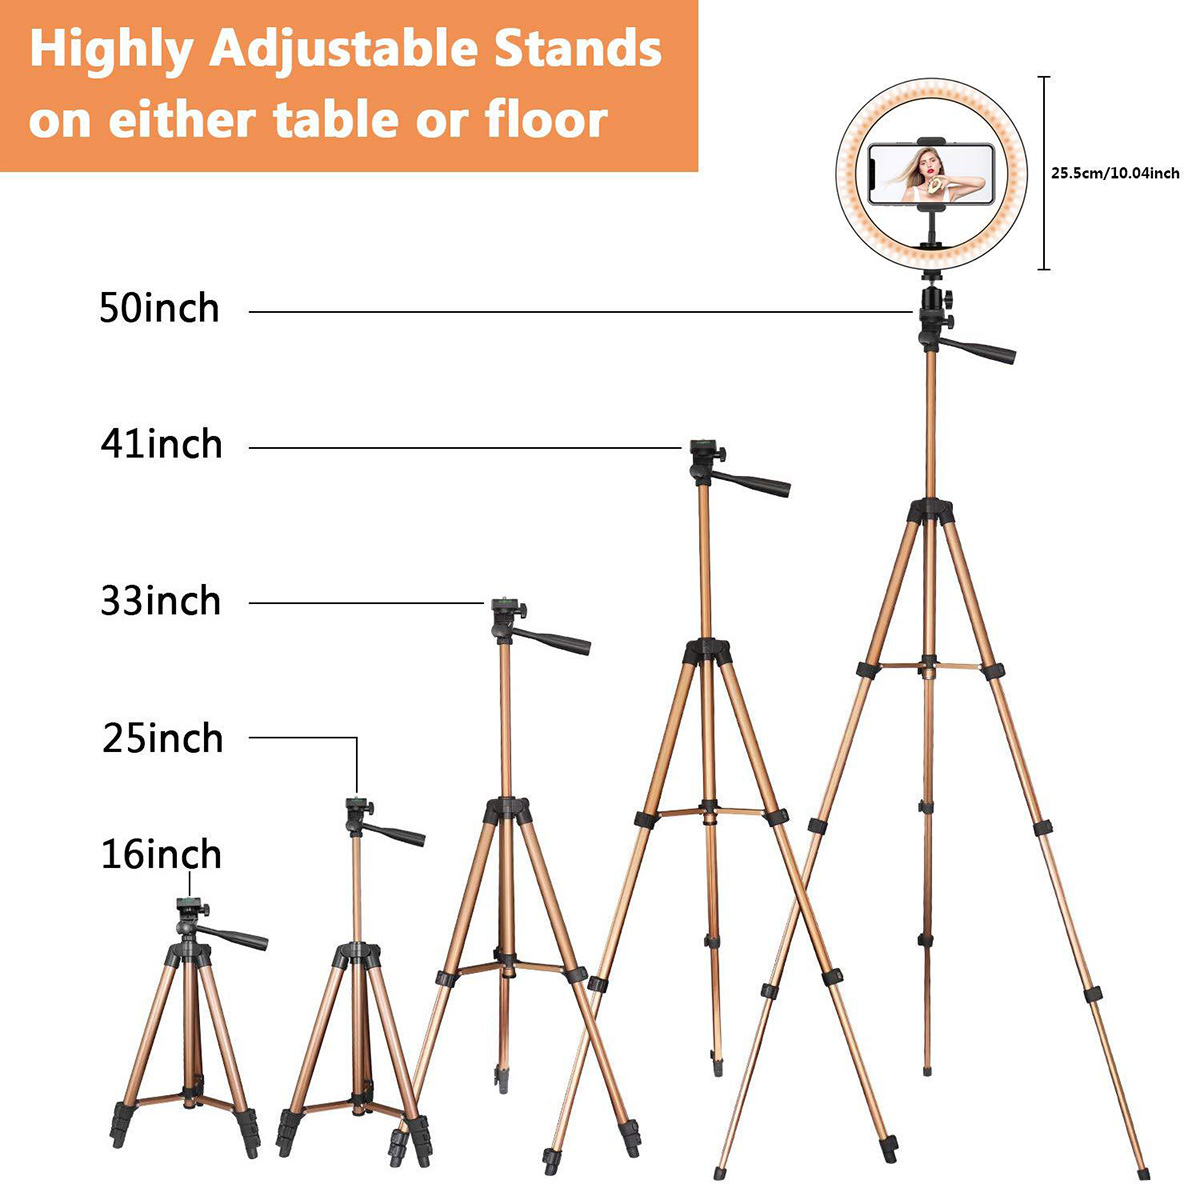 Controllable-6-inch-10-inch-LED-Selfie-Ring-Light--Tripod-Stand--Phone-Holder-Photography-YouTube-Vi-1646618-1